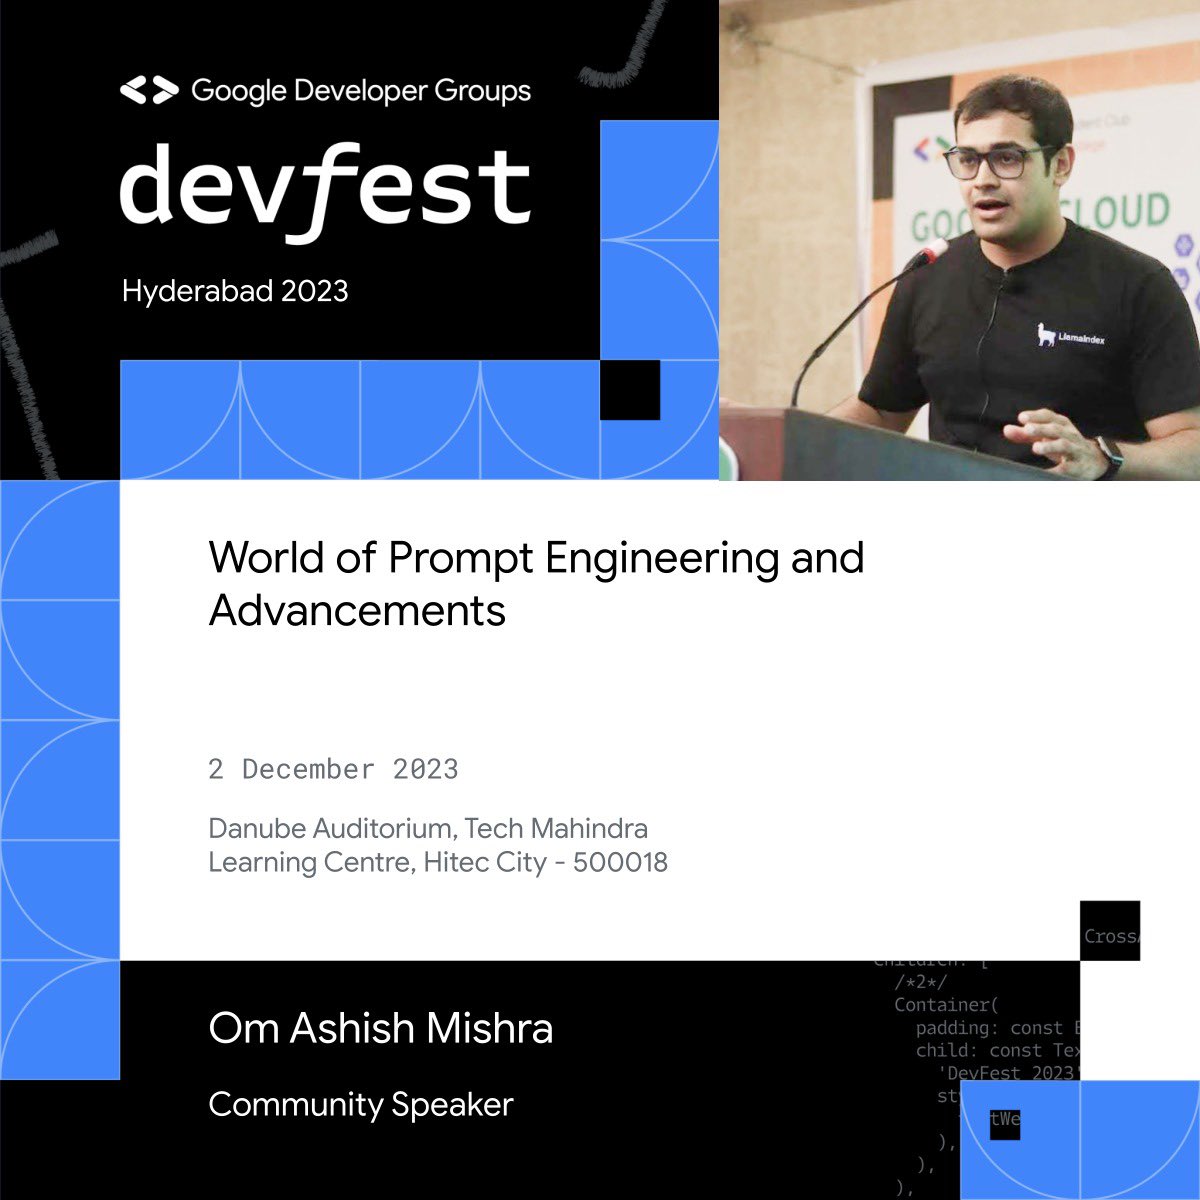 Boasting a robust background as a Data Scientist, Om Ashish Mishra joins us to talk about the world of prompt Engineering and advancements, this Saturday at Hyderabad's DevFest! 📍Tech Mahindra, Hyderabad 🗓️ 2 December, 2023 More details in the🔗link in our bio! #DevFest2023